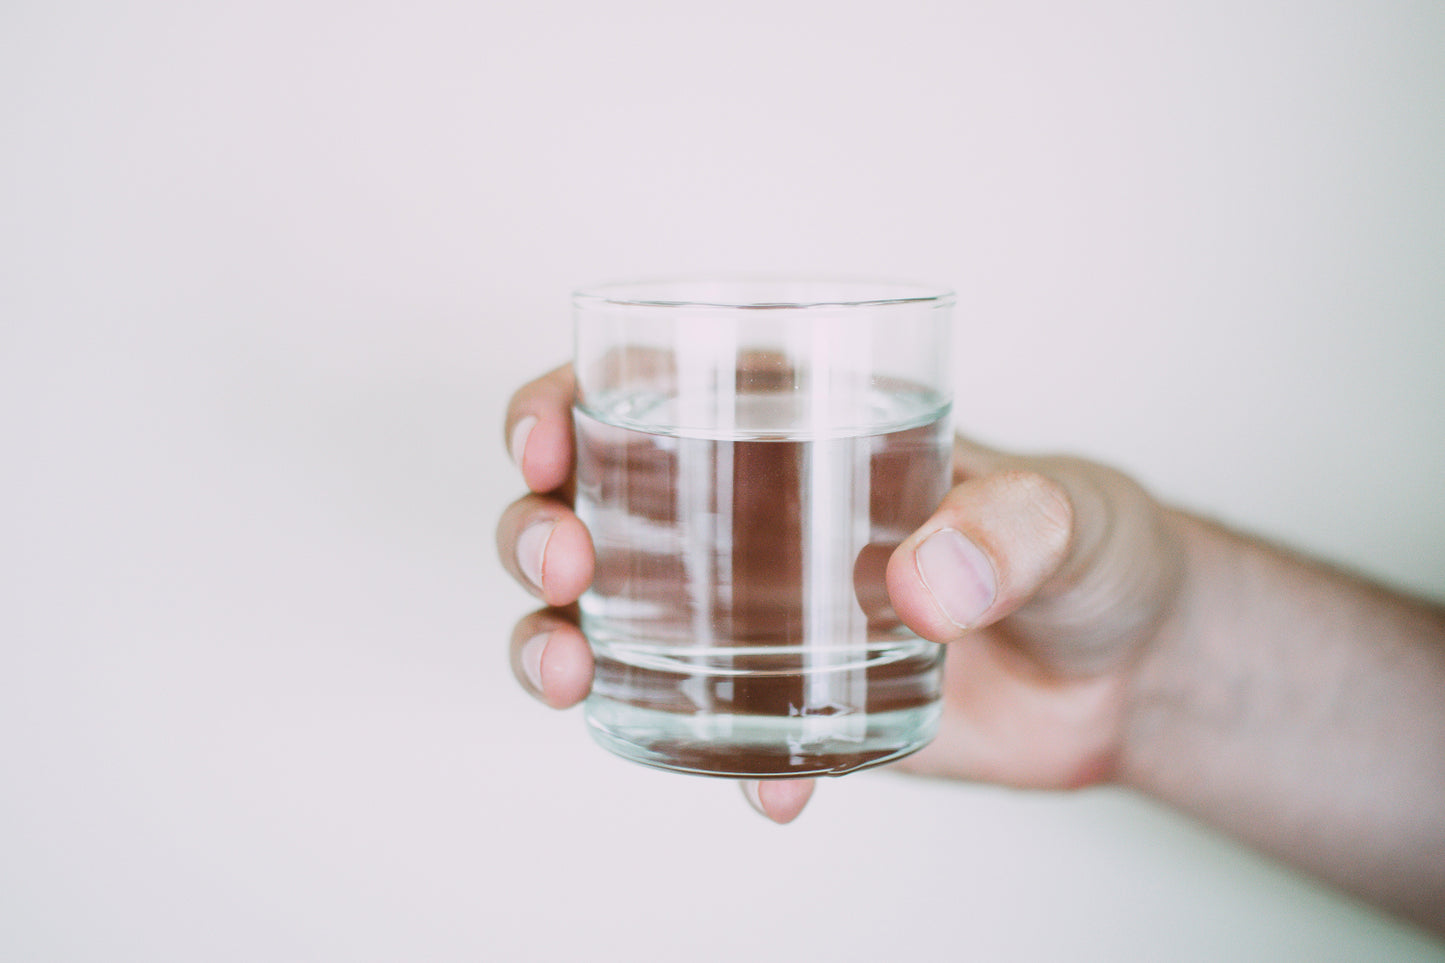 A glass of cool, clean water